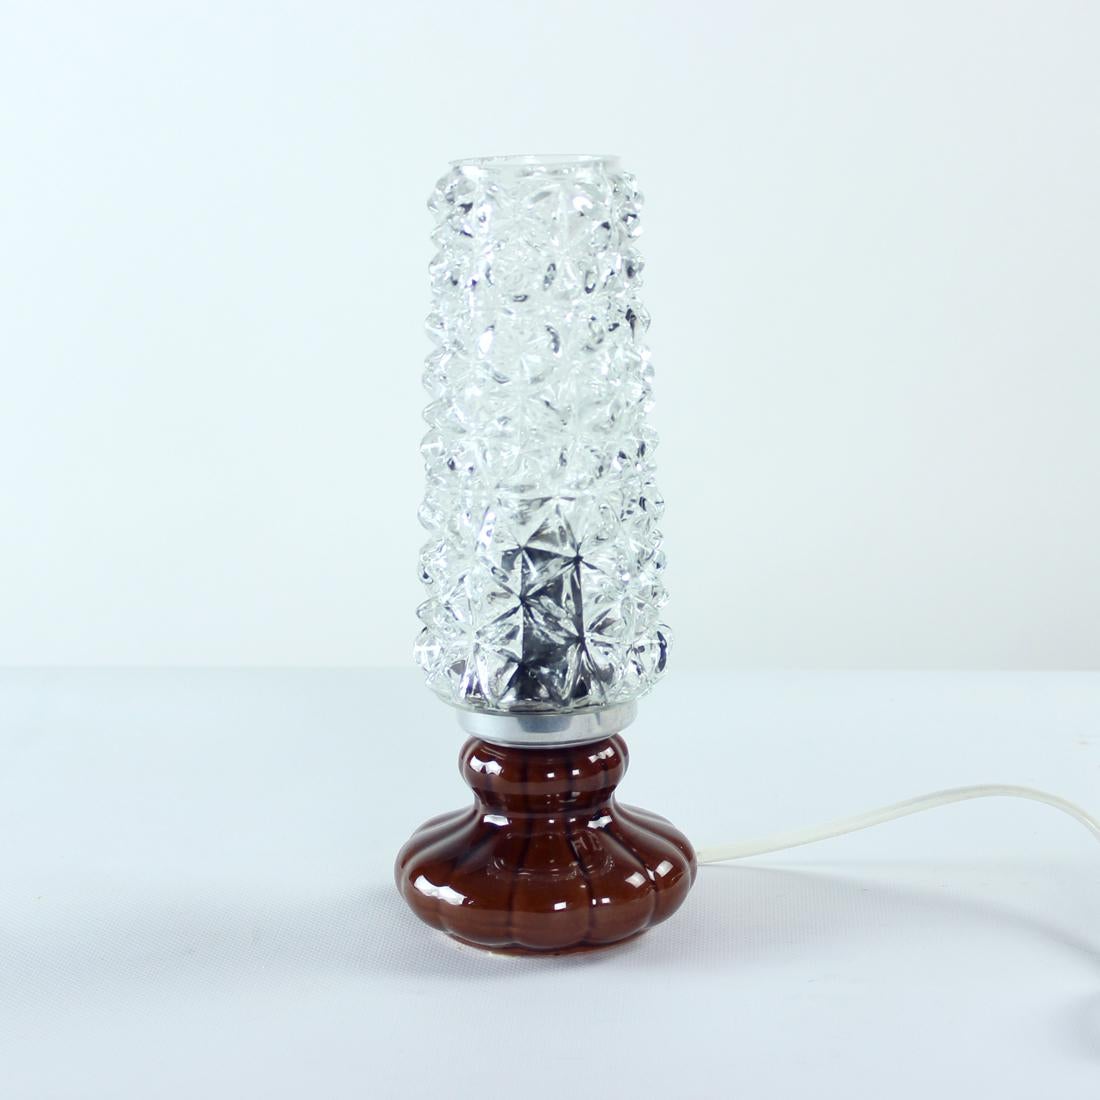 Beautiful table lamp produced in Czechoslovakia in 1960s. Produced in two amazing materials - ceramic base and glass shade. The base is made in brown glazed ceramics, shows no wear or tear, excellent condition. The shade is made in pressed glass